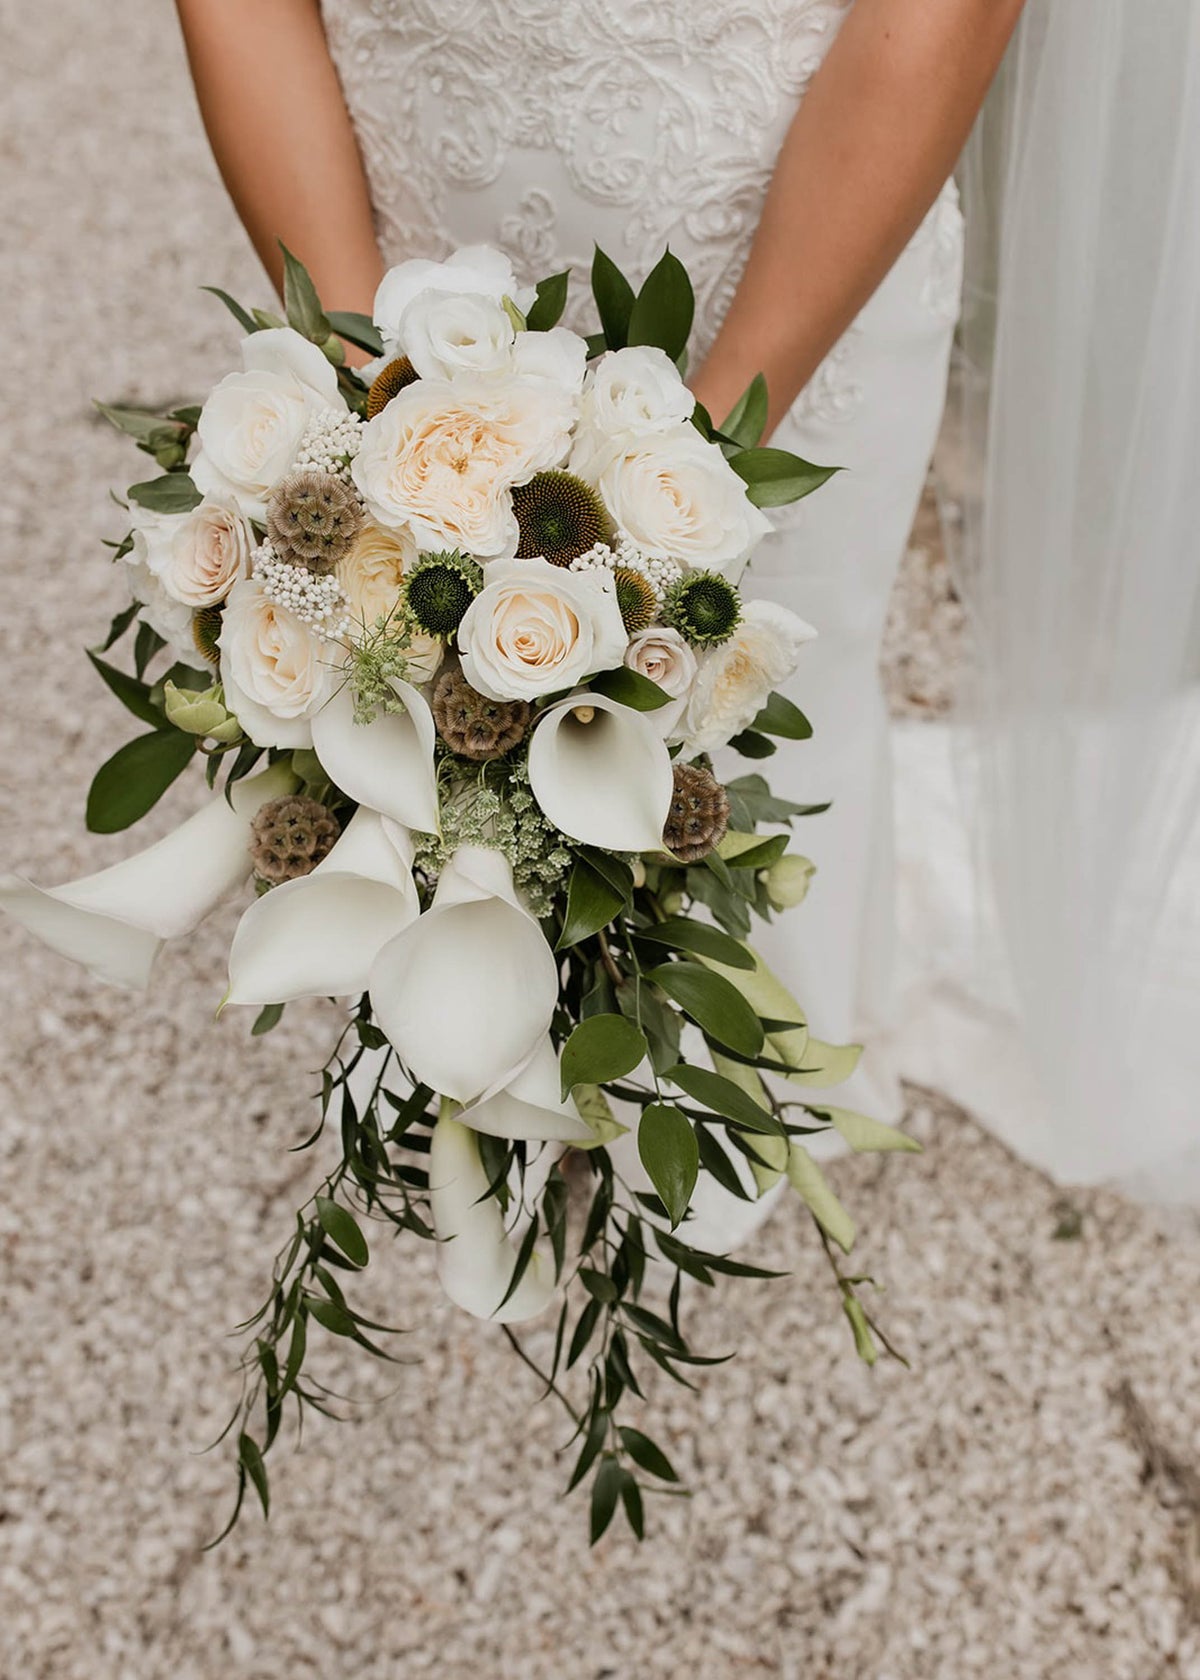 WHITE-BRIDAL-FLOWER-BOUQUET-BEING-HELD-BY-BRIDE